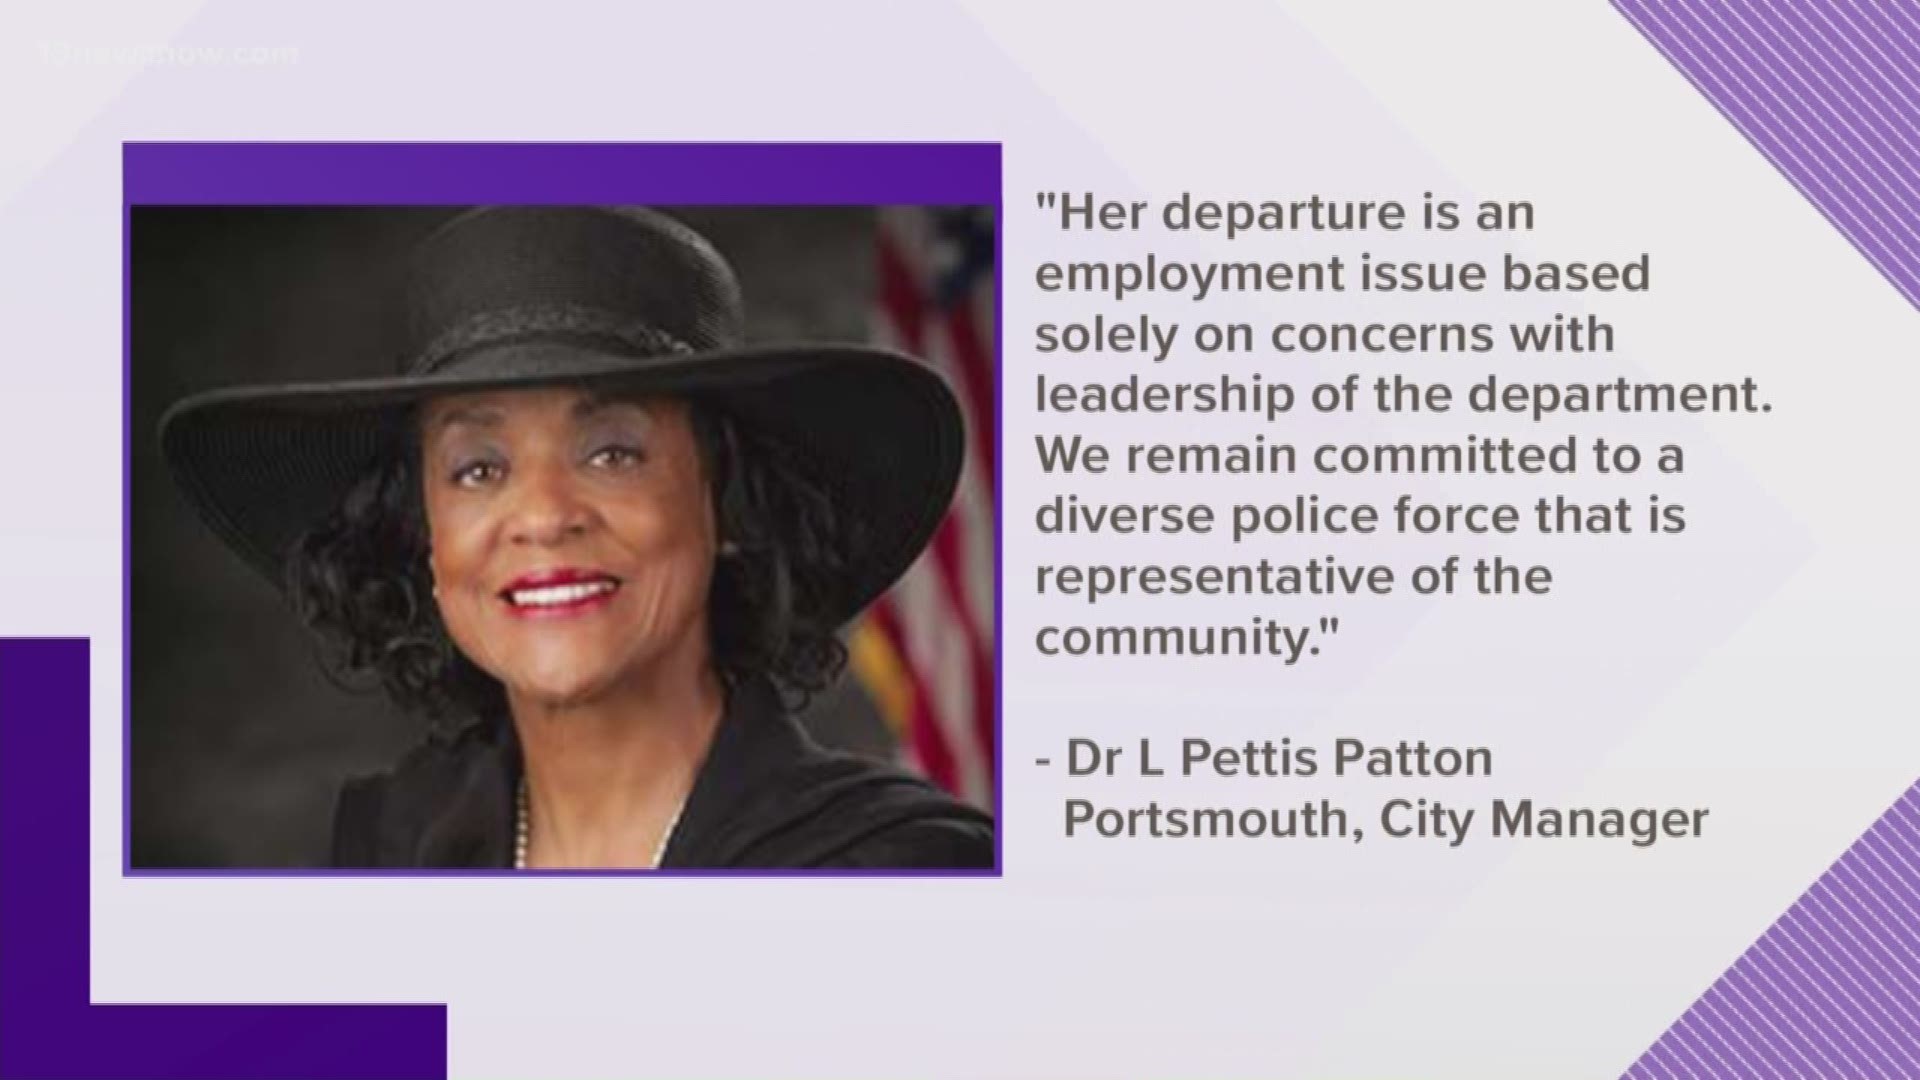 The statement said in part: "Her departure is an employment issue based solely on concerns with leadership of the department. We remain committed to a diverse police force that is representative of the community."